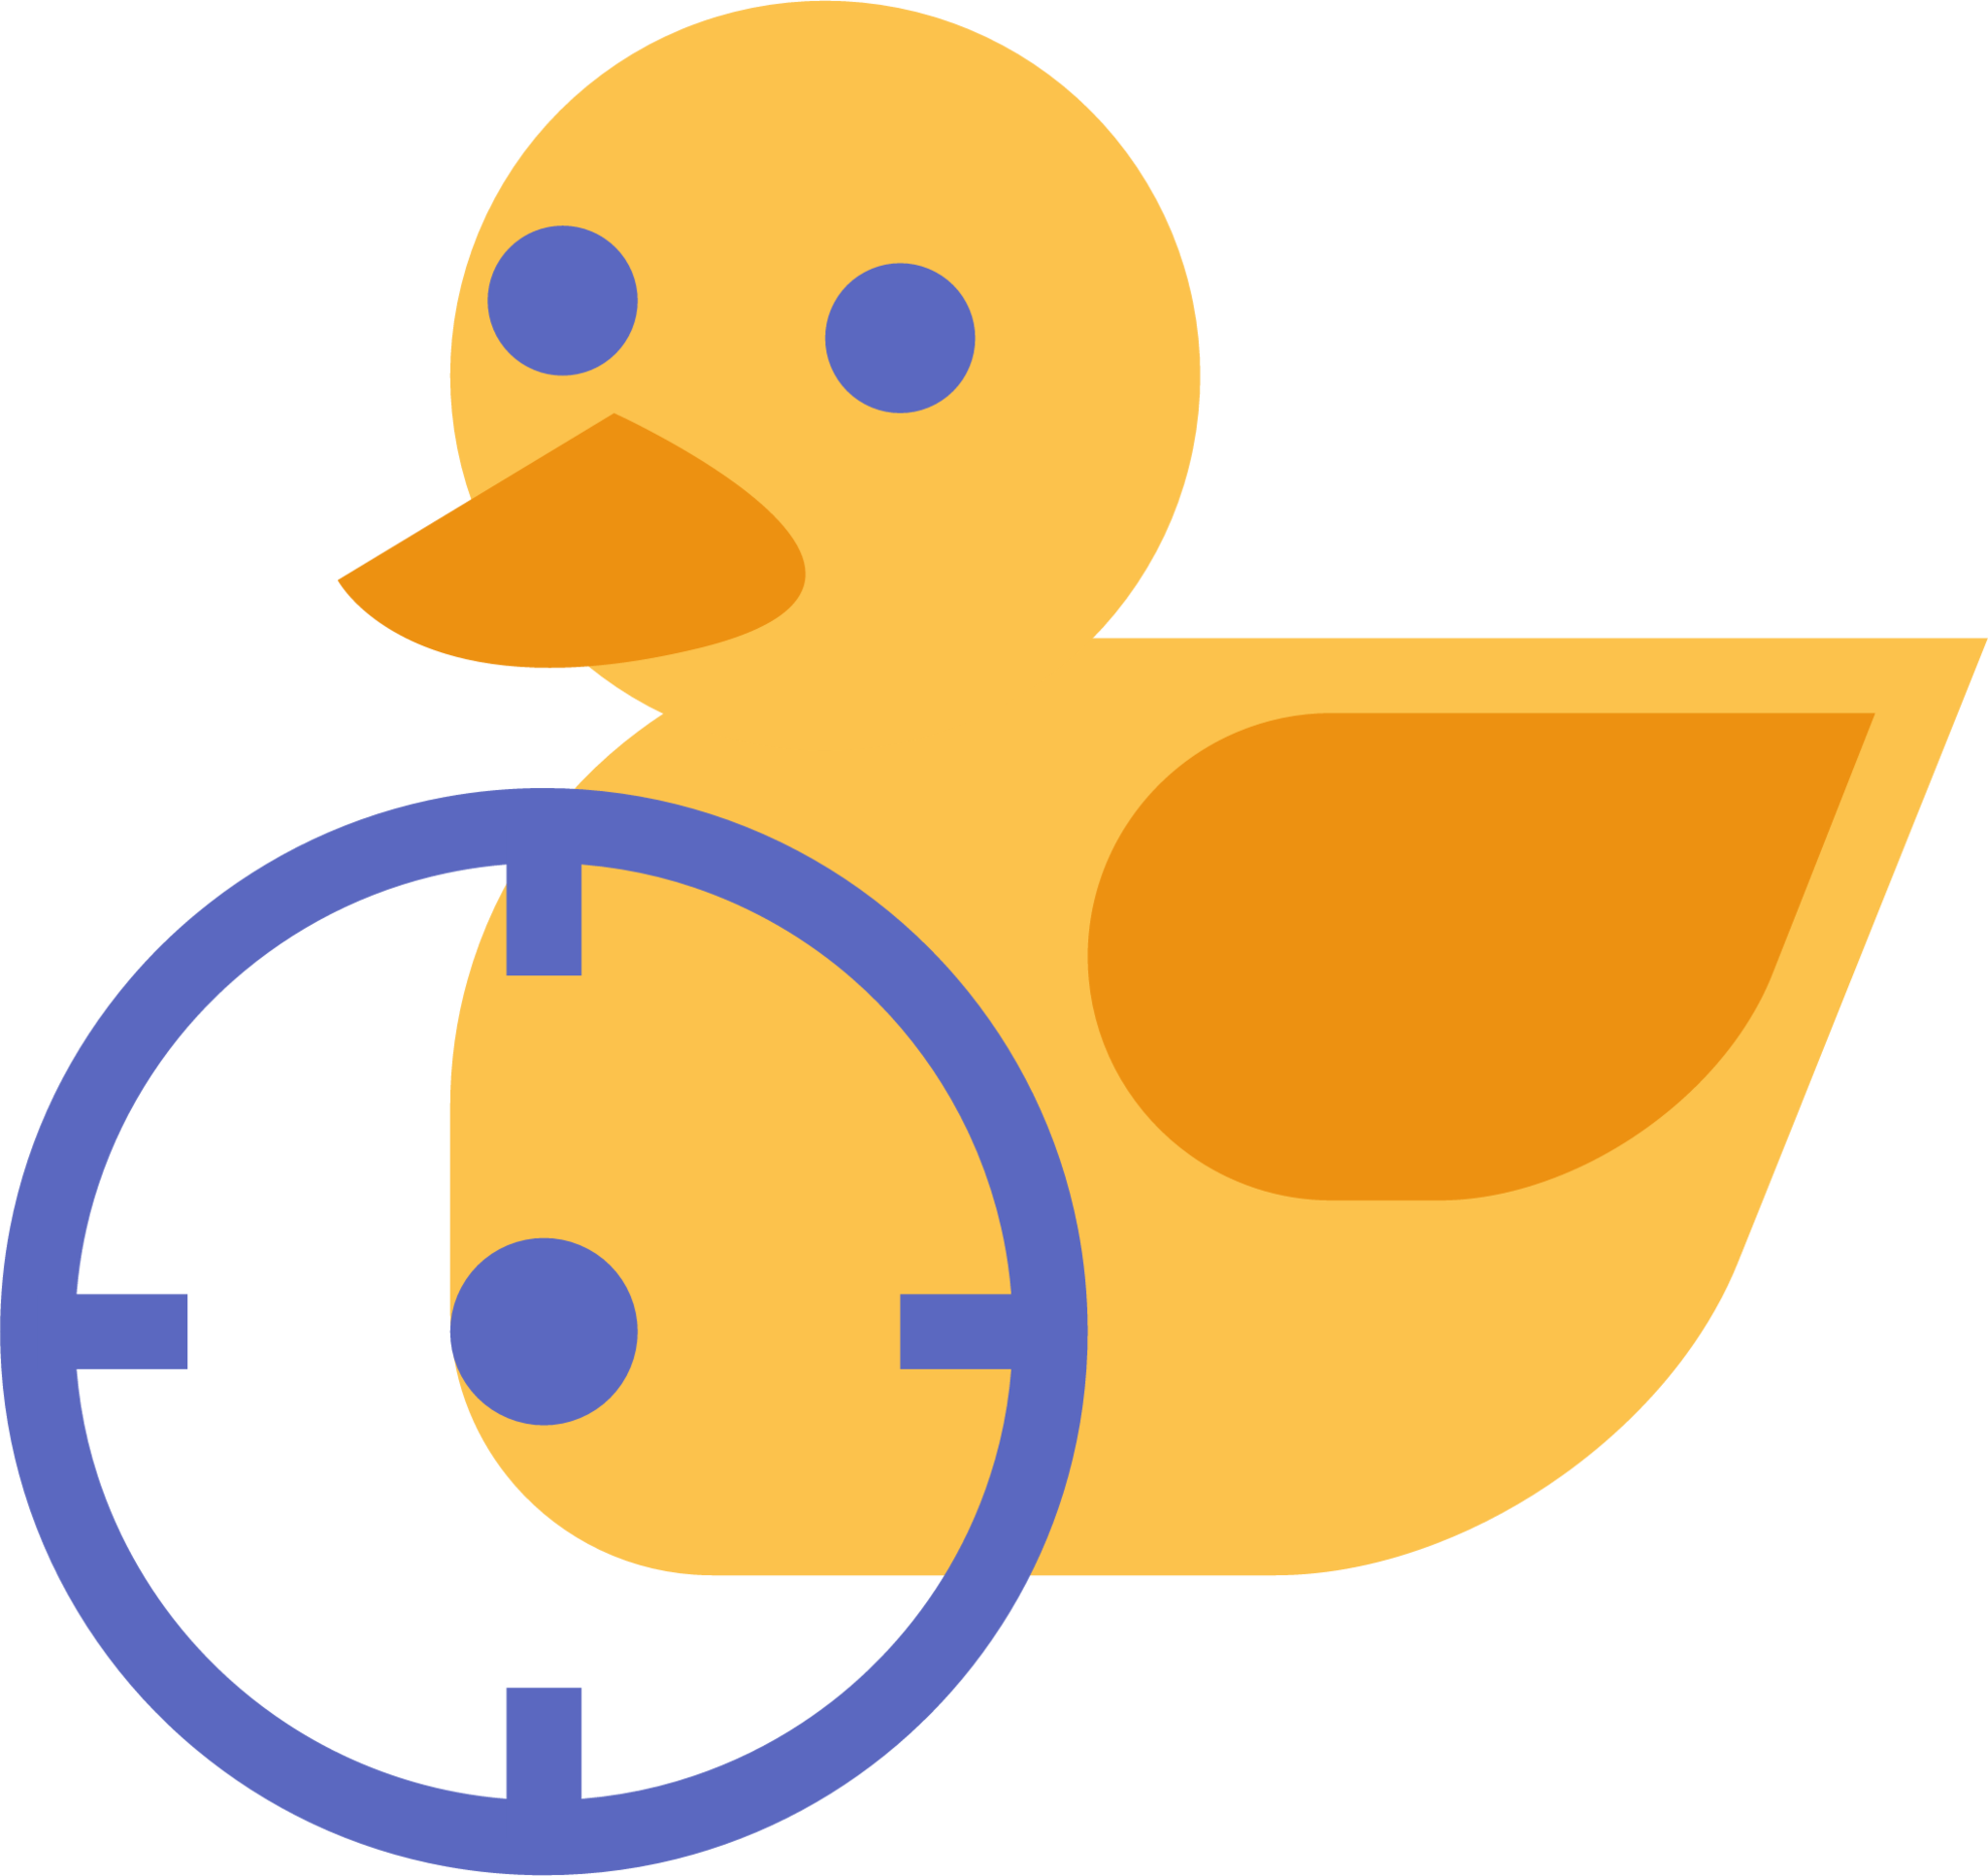 duck target icon